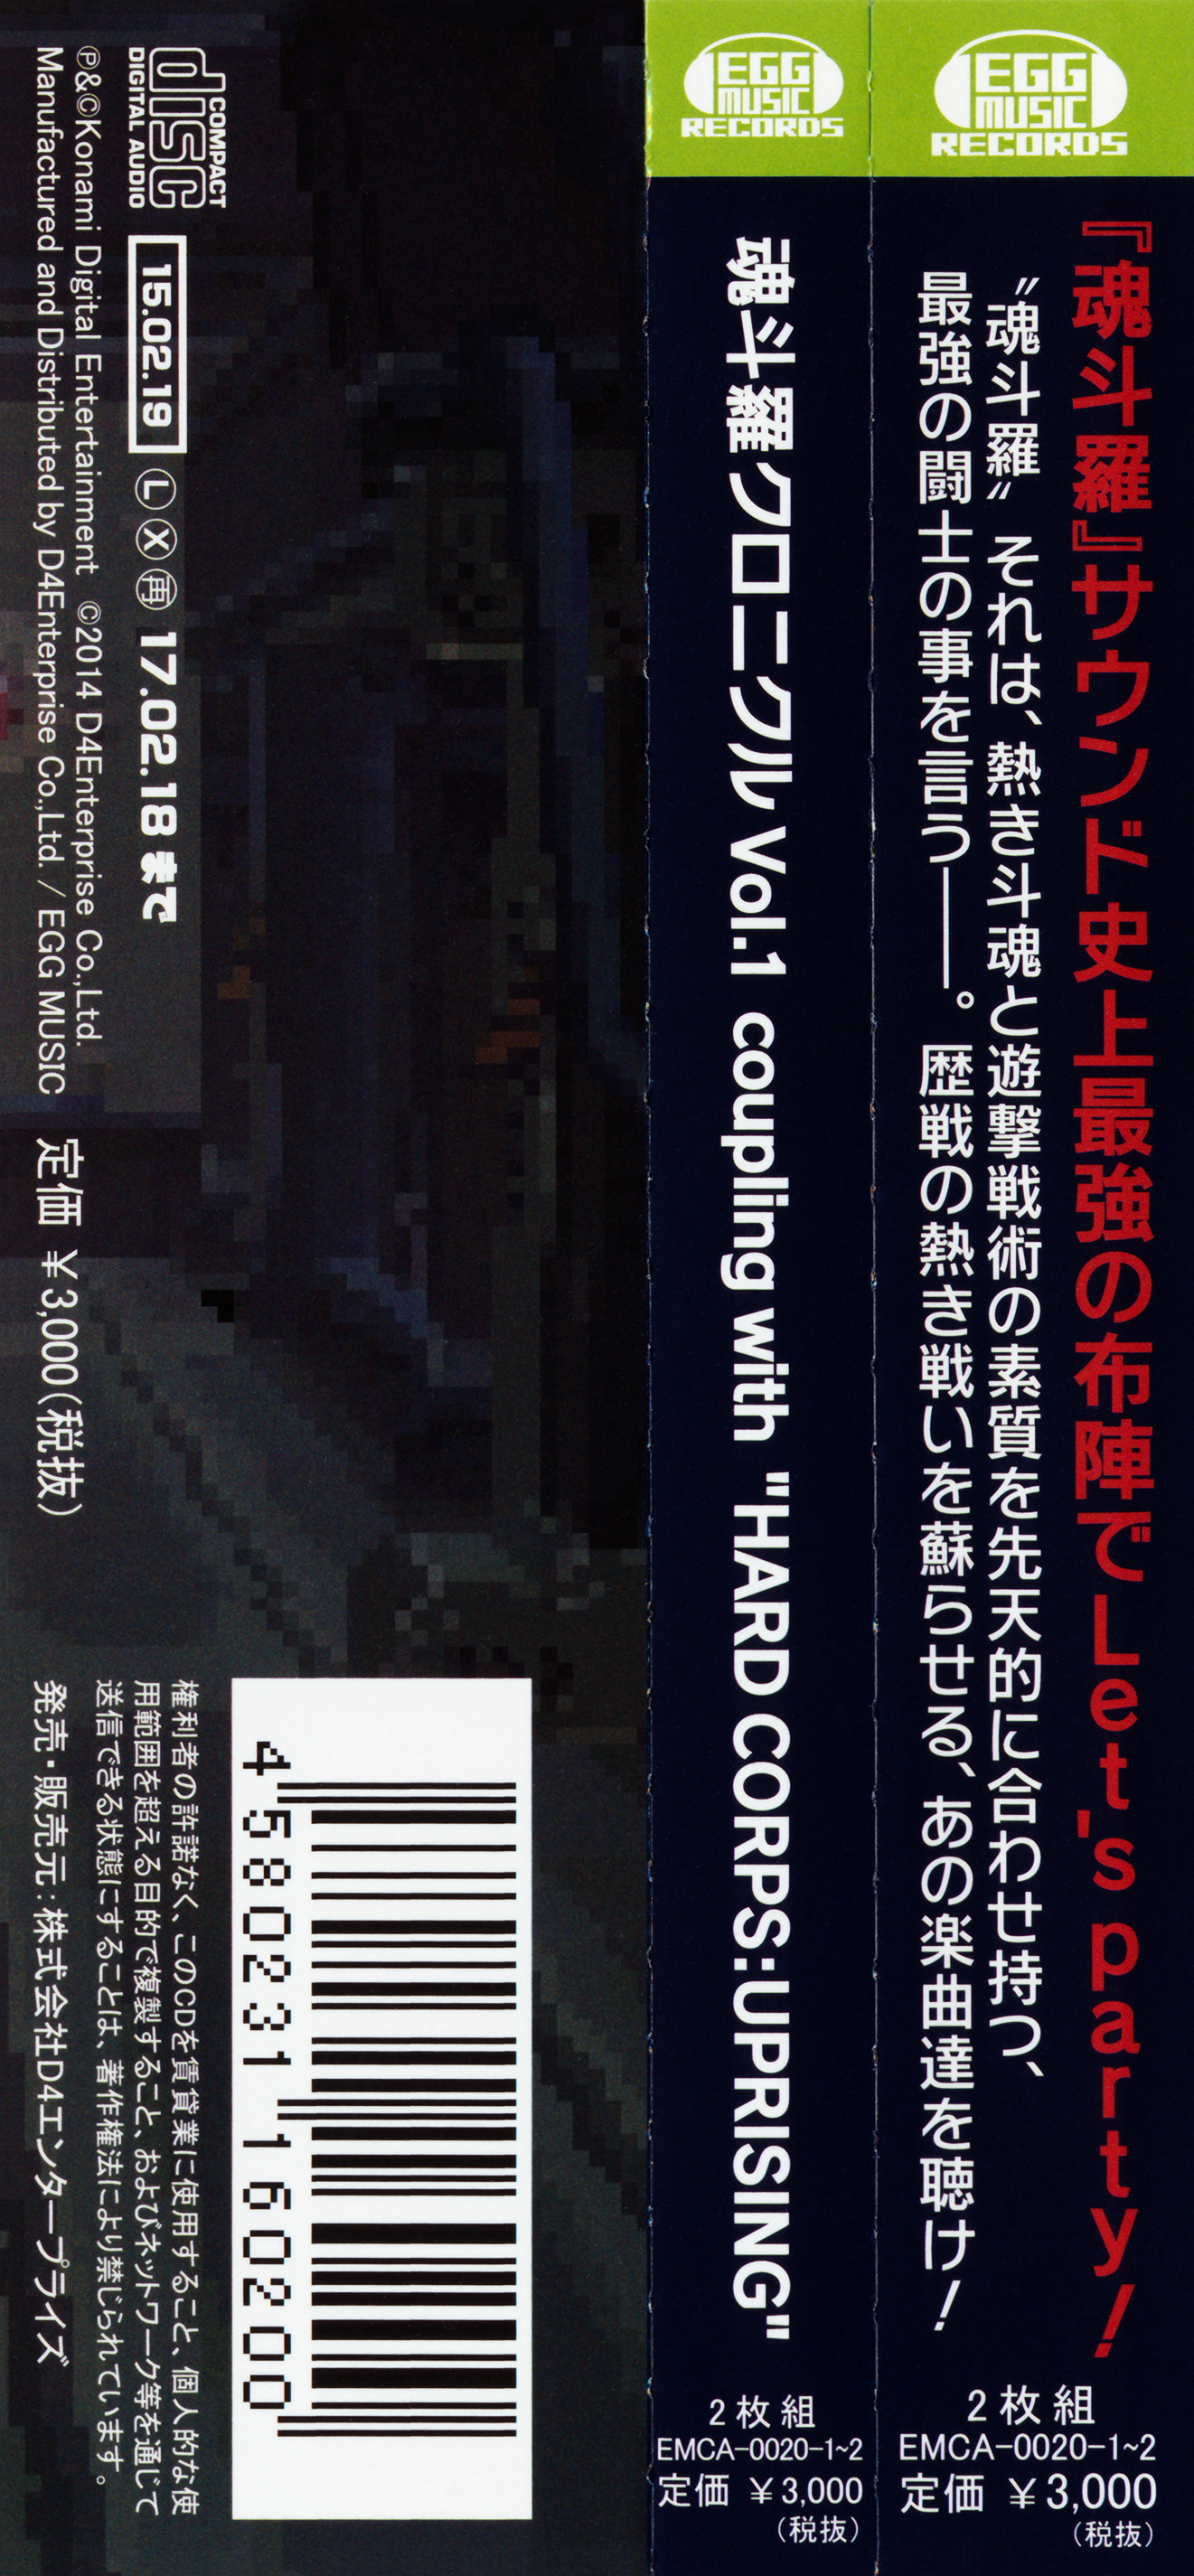 Contra Chronicle Vol.1 coupling with 